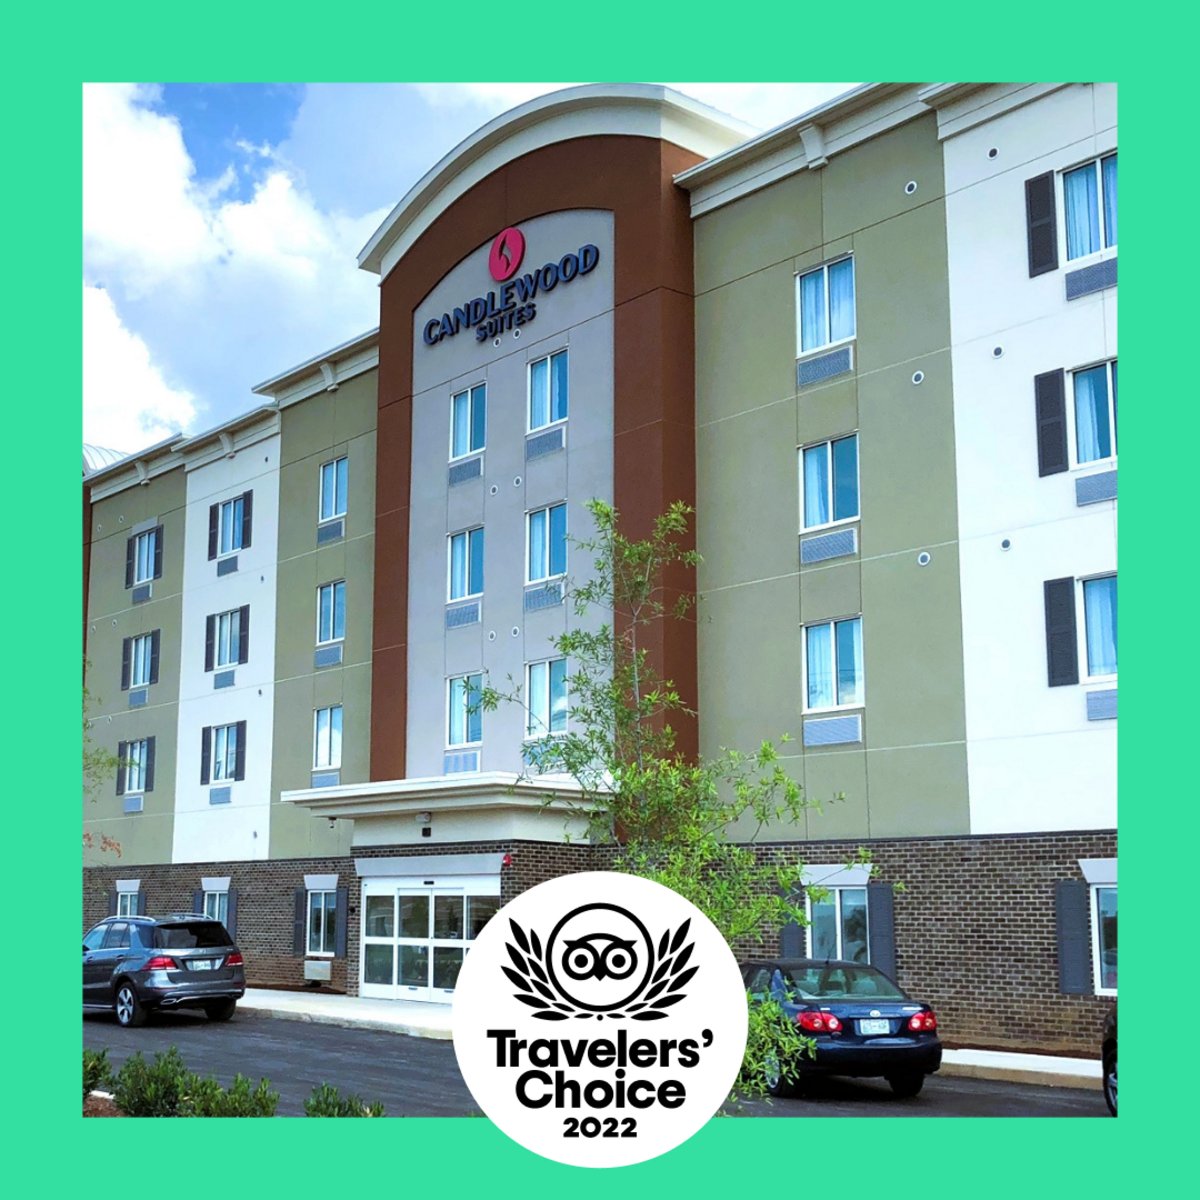 Looking to make the most of your stay at Candlewood Suites Lebanon? You can register to earn 2,000 #bonuspoints for every 2 nights that you stay through April 14, 2023. Hurry up, and book your stay today! bit.ly/3yNK62U #TravelTN #CandlewoodSuites